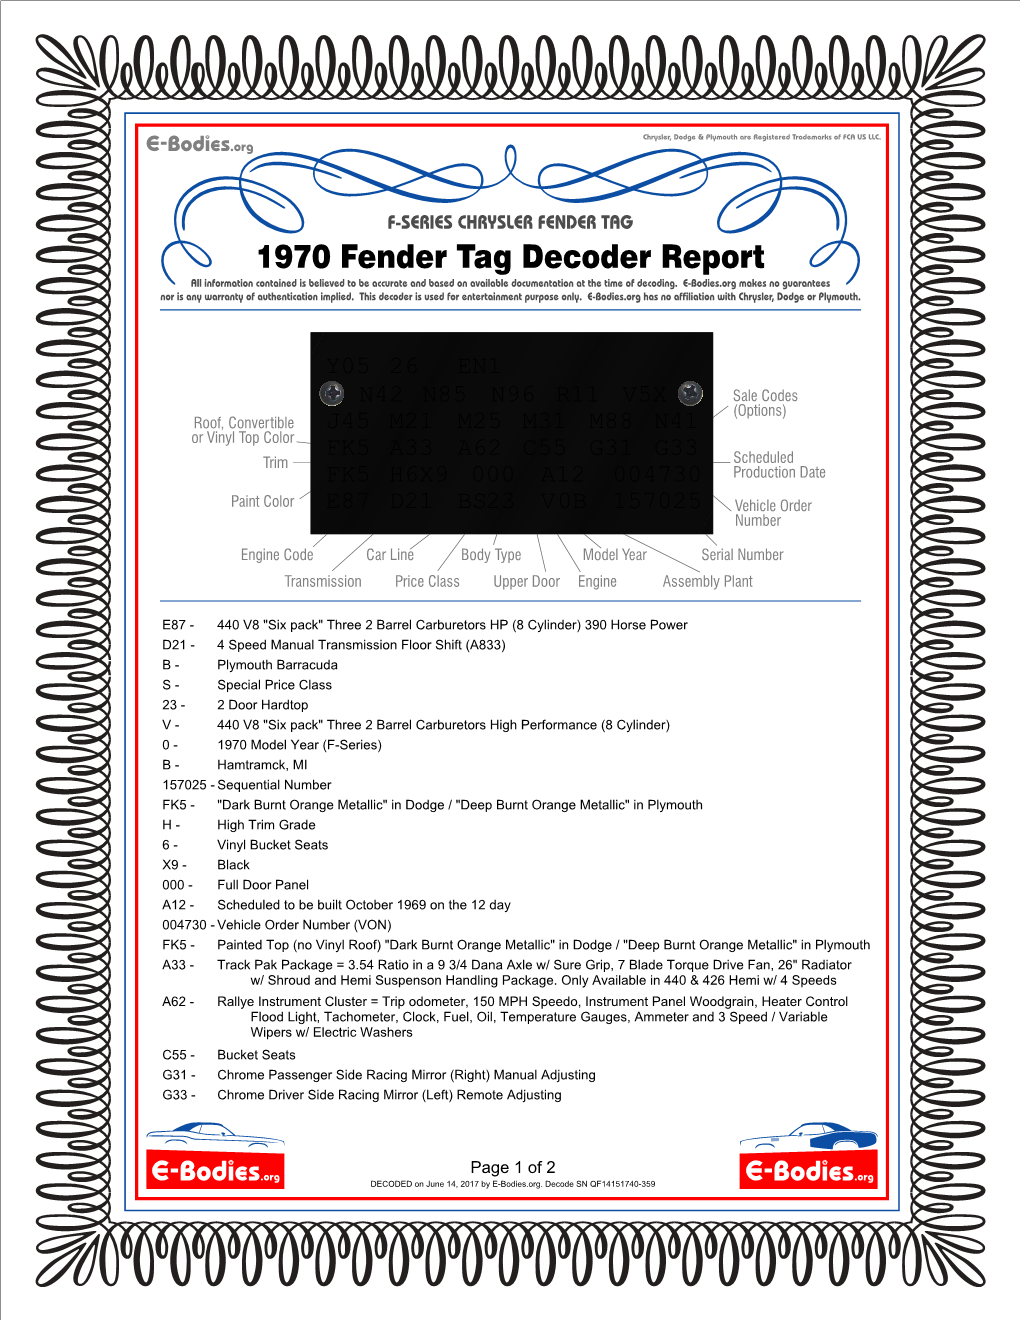 1970 Fender Tag Decoder Report All Information Contained Is Believed to Be Accurate and Based on Available Documentation at the Time of Decoding